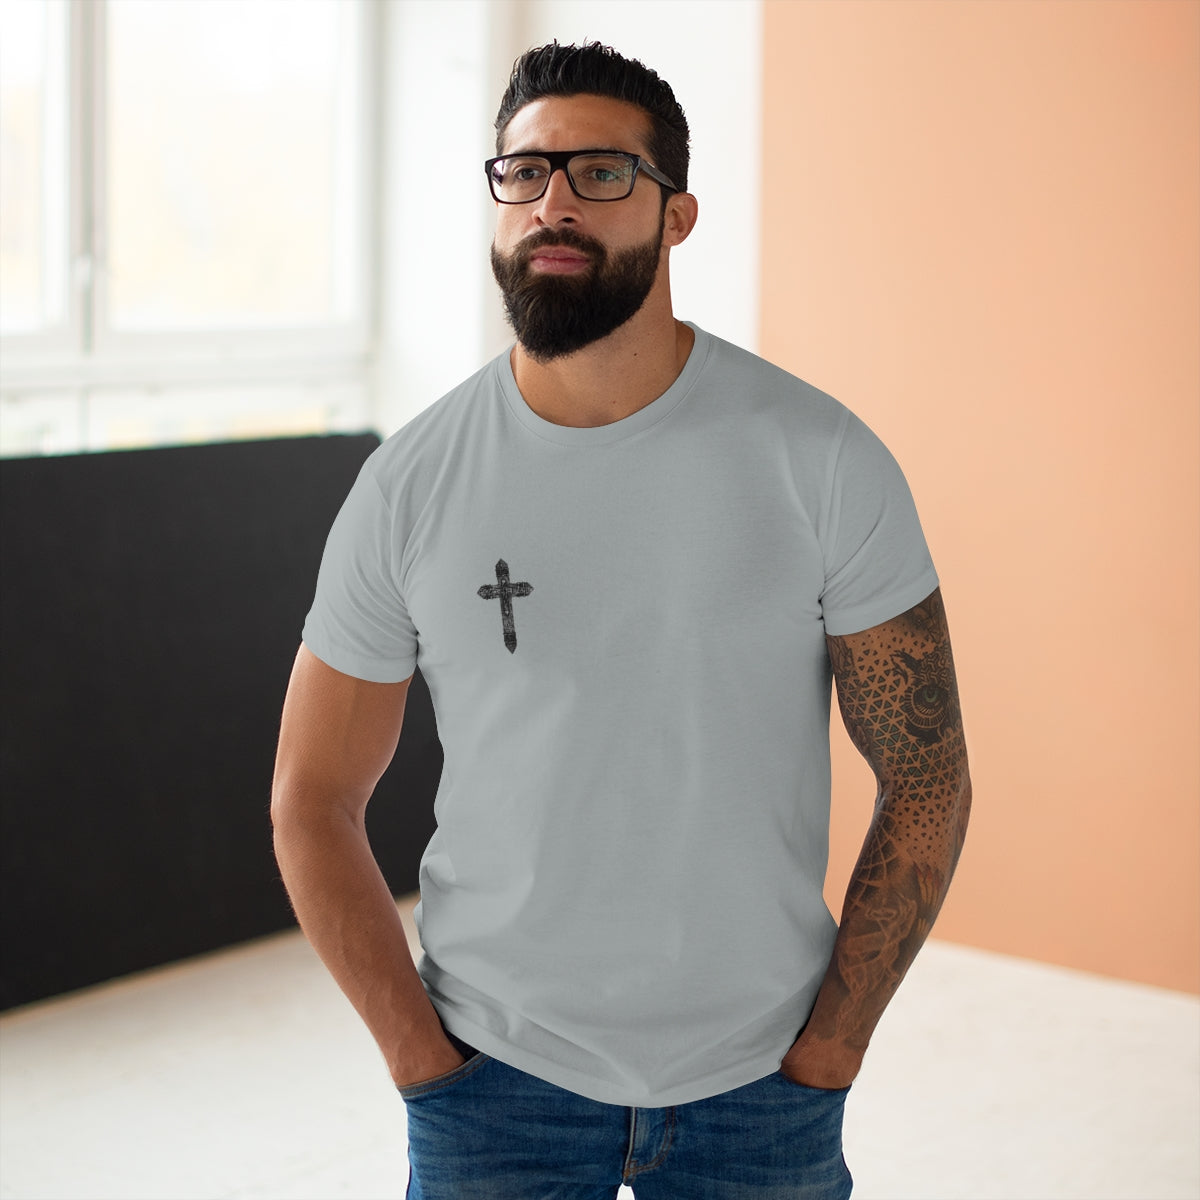 Work With All Your Heart Men's Tee